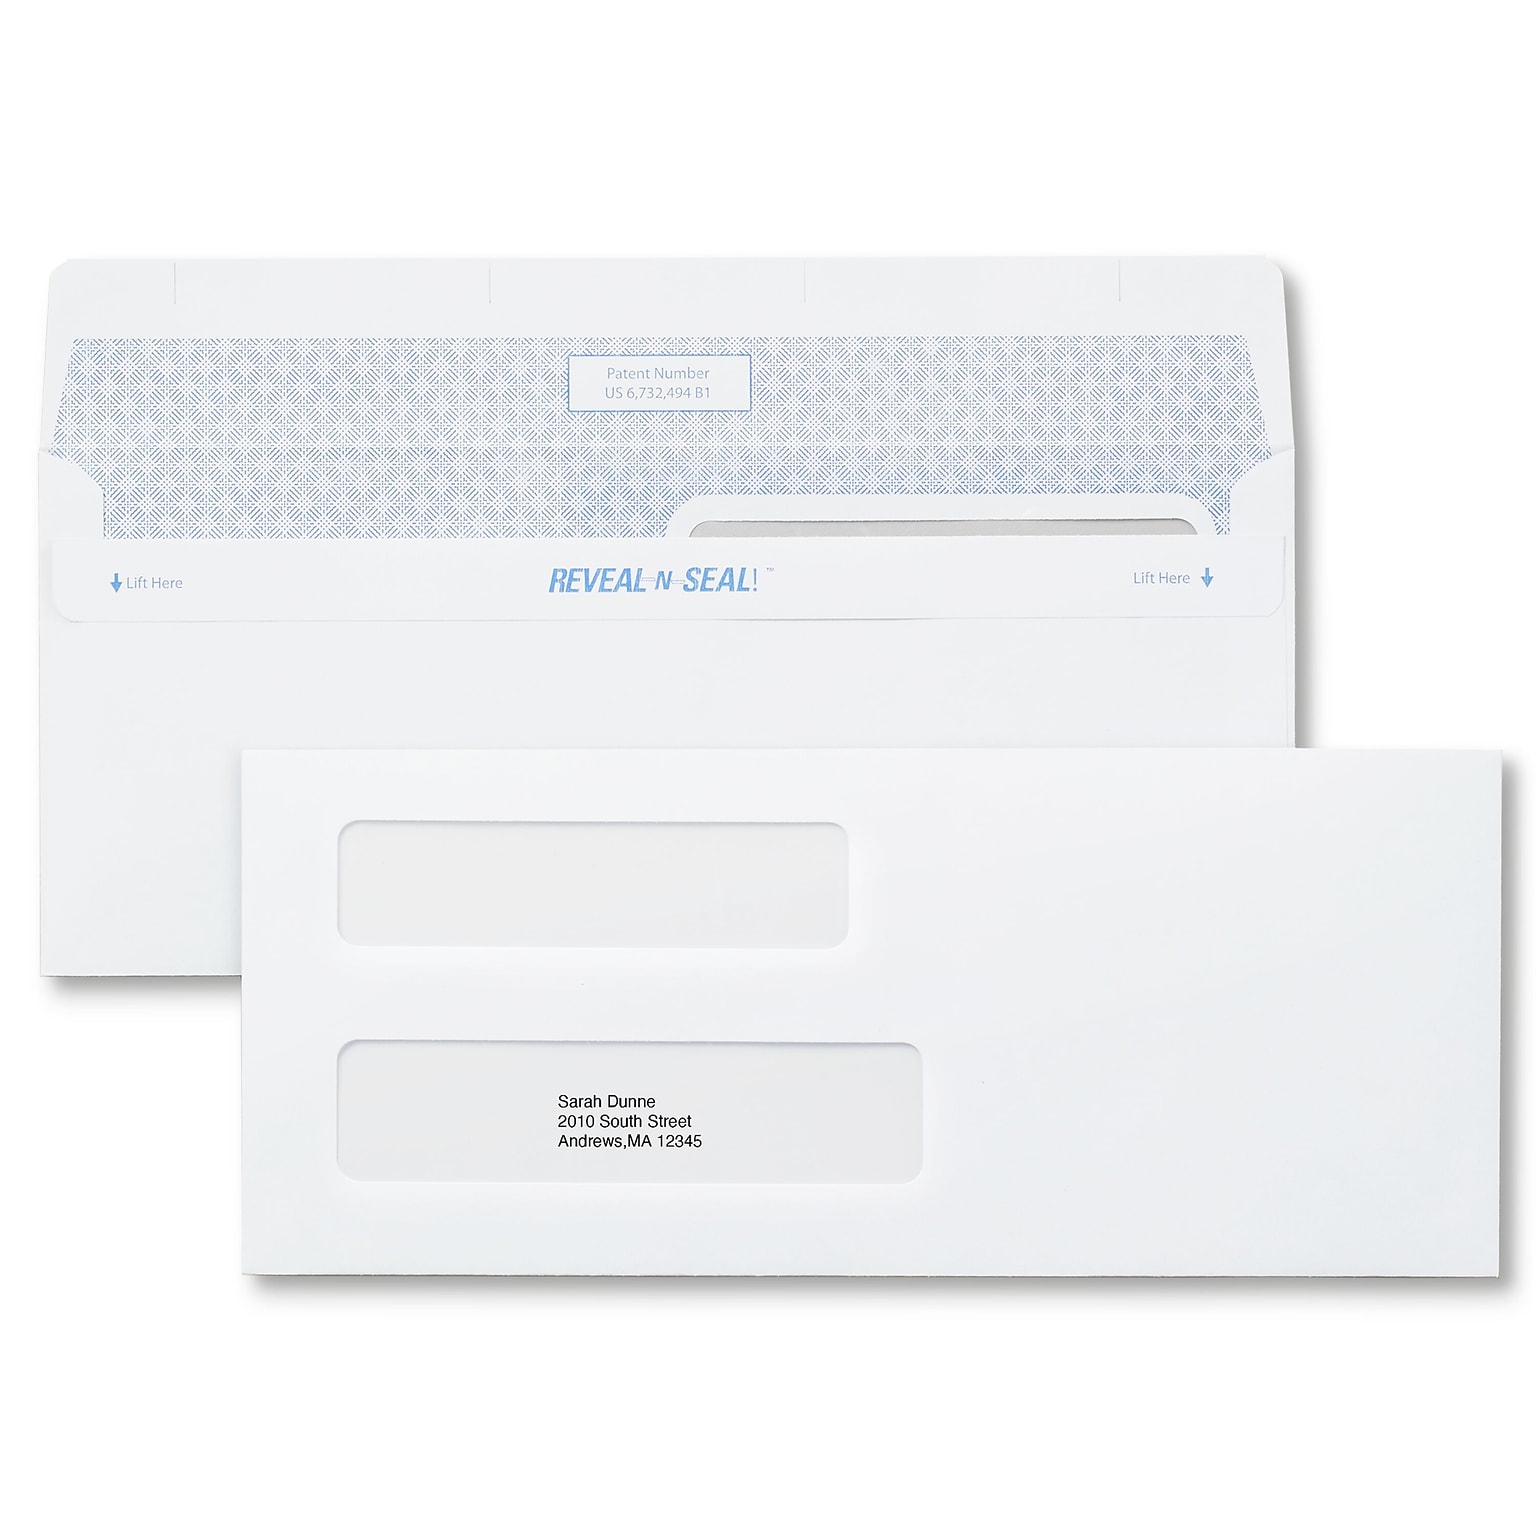 Staples® Reveal-N-Seal Security Tinted #8 Business Envelopes, 3 5/8 x 8 5/8, White, 500/Box (SPL1775860)